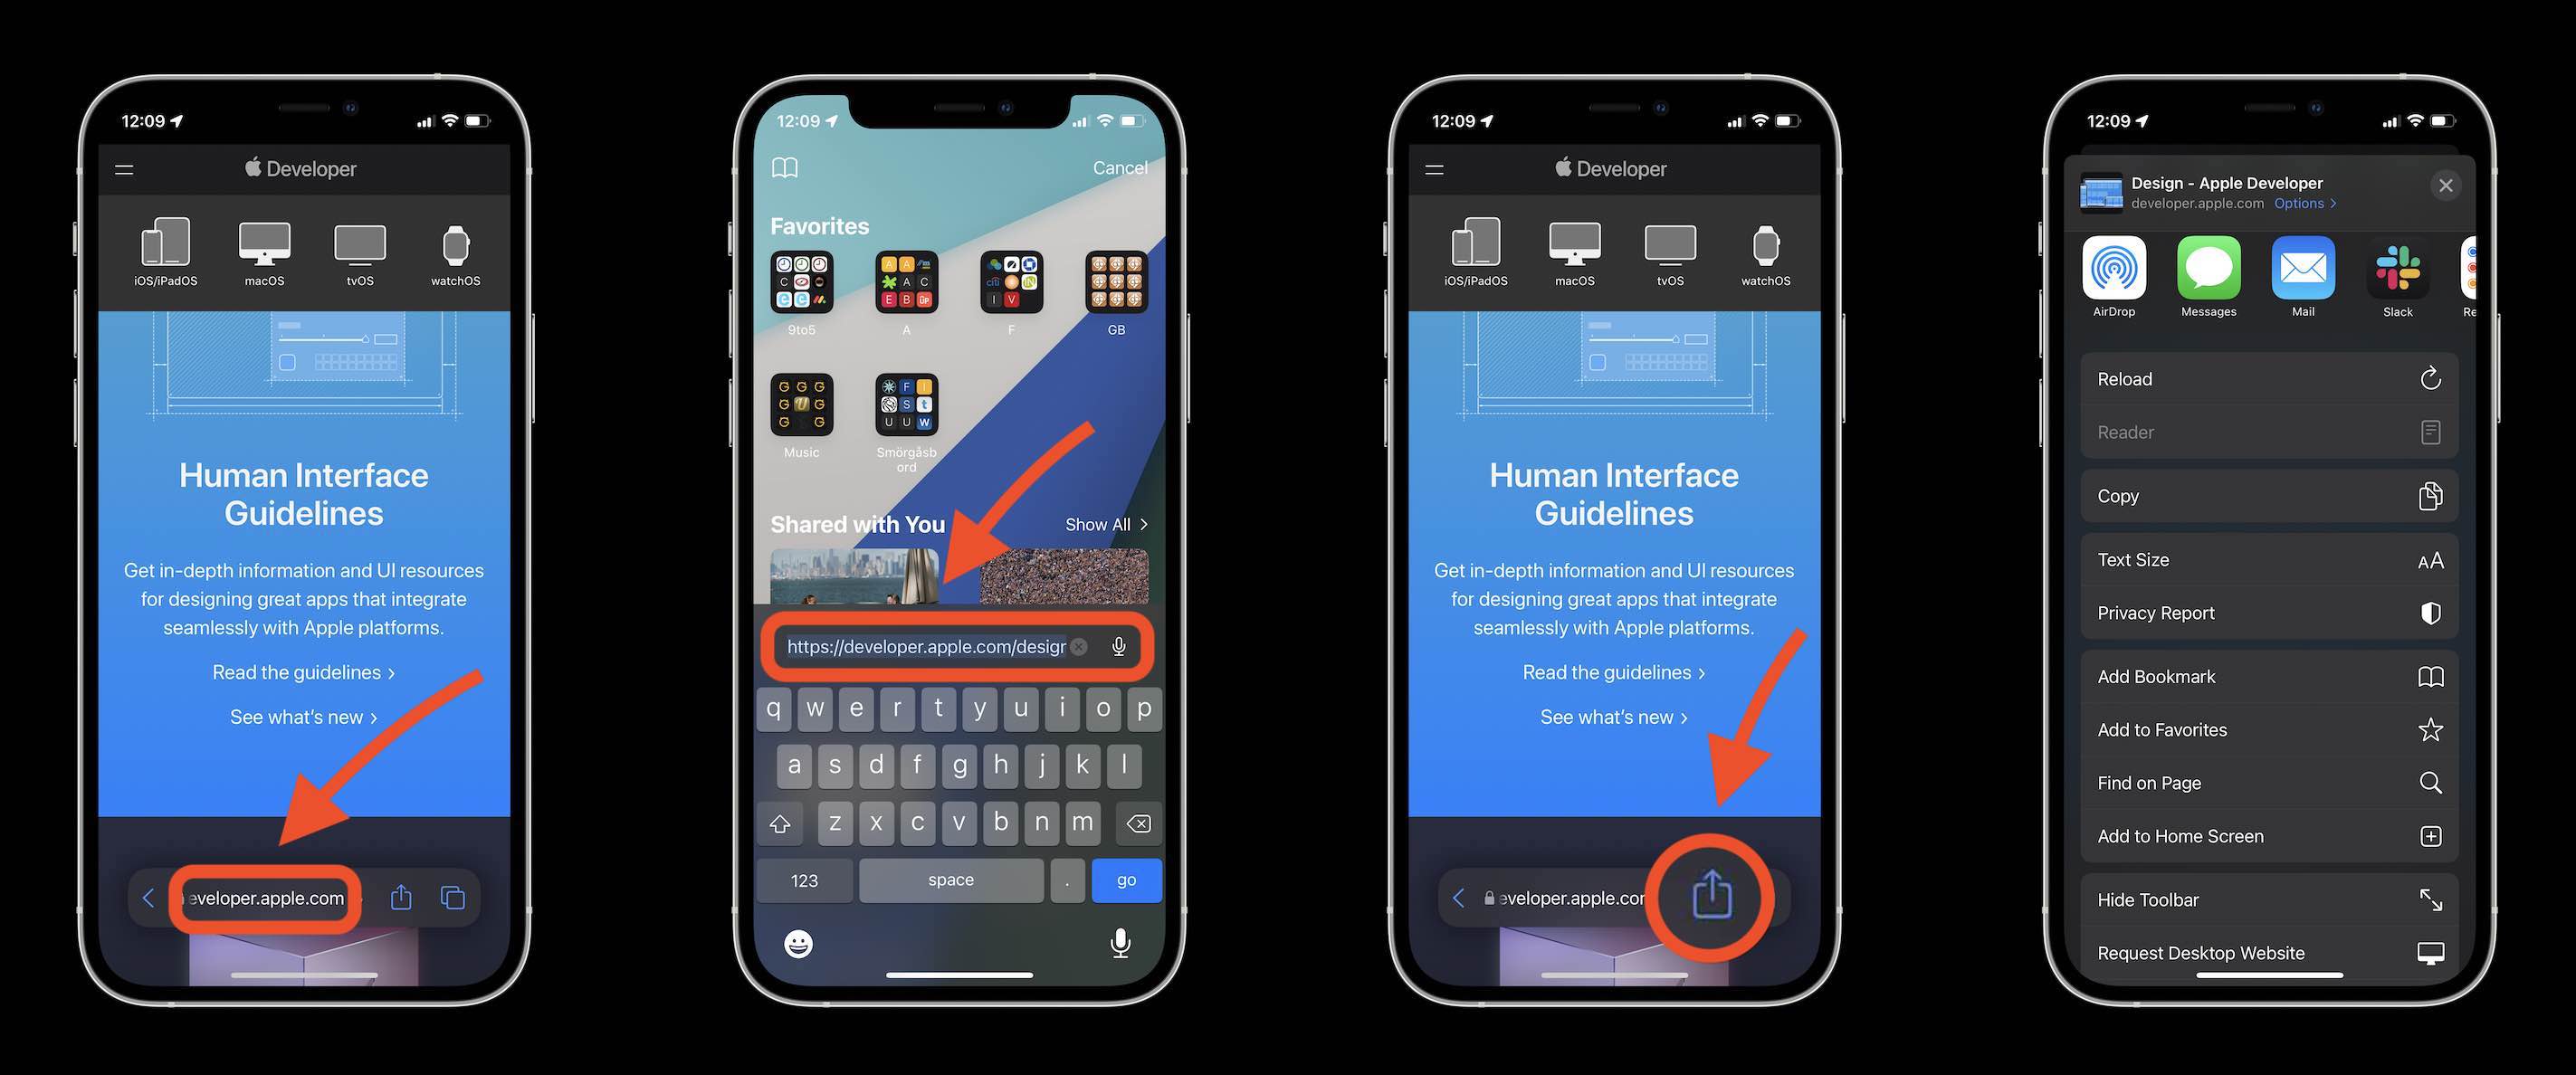 How Safari in iOS 15 works - search/tab bar, share button, more